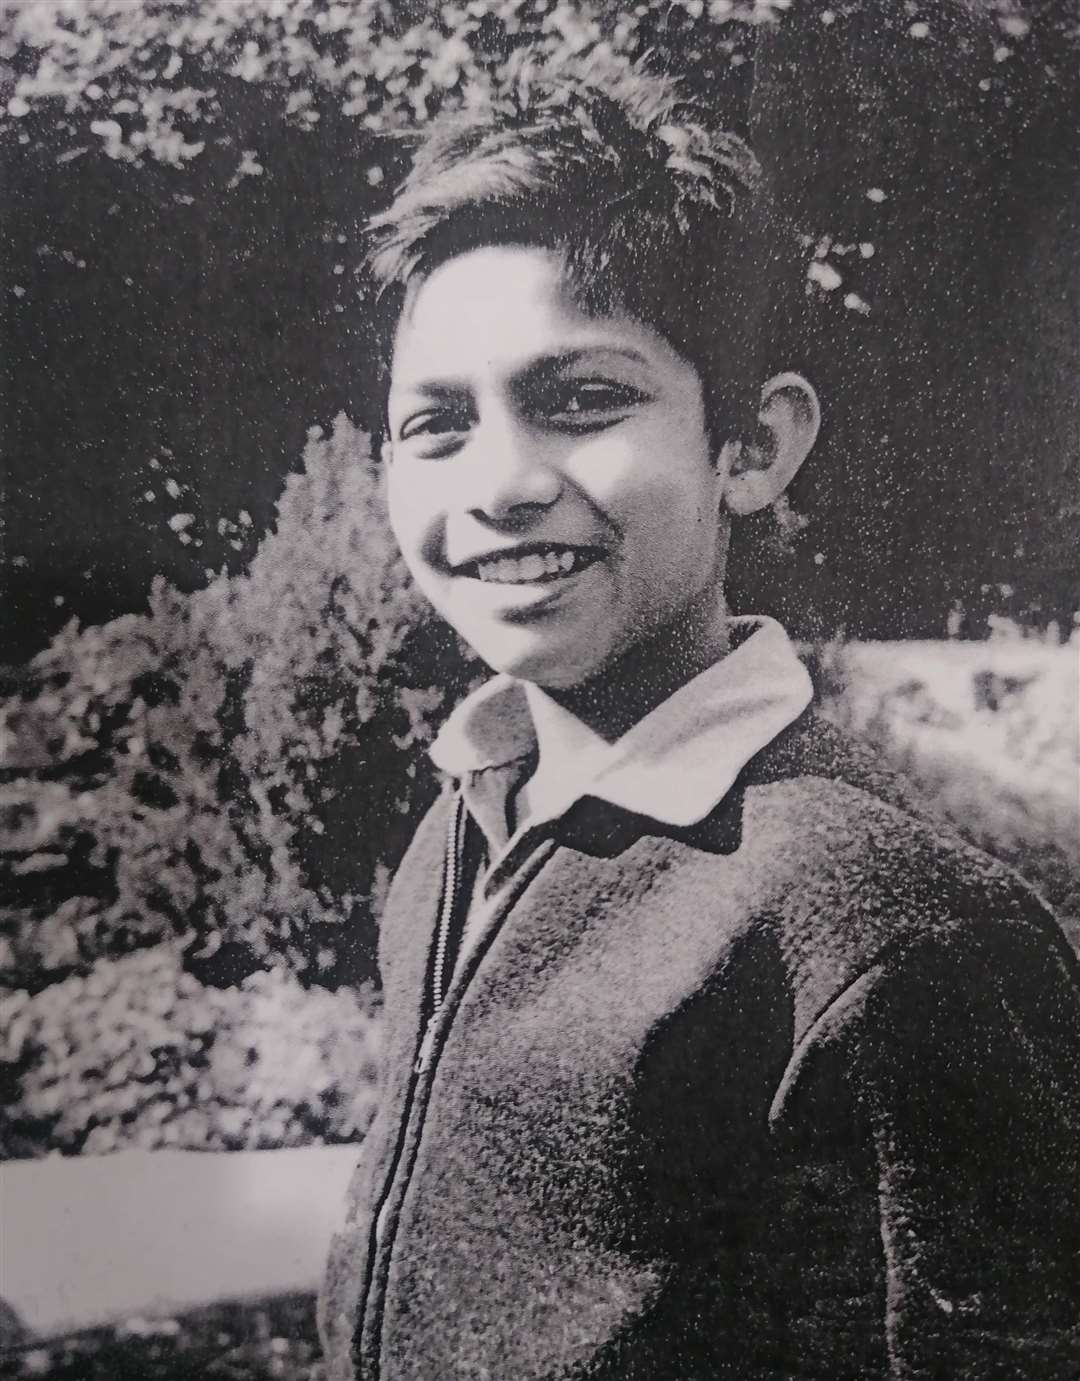 Young Dinesh, shortly after moving to the UK